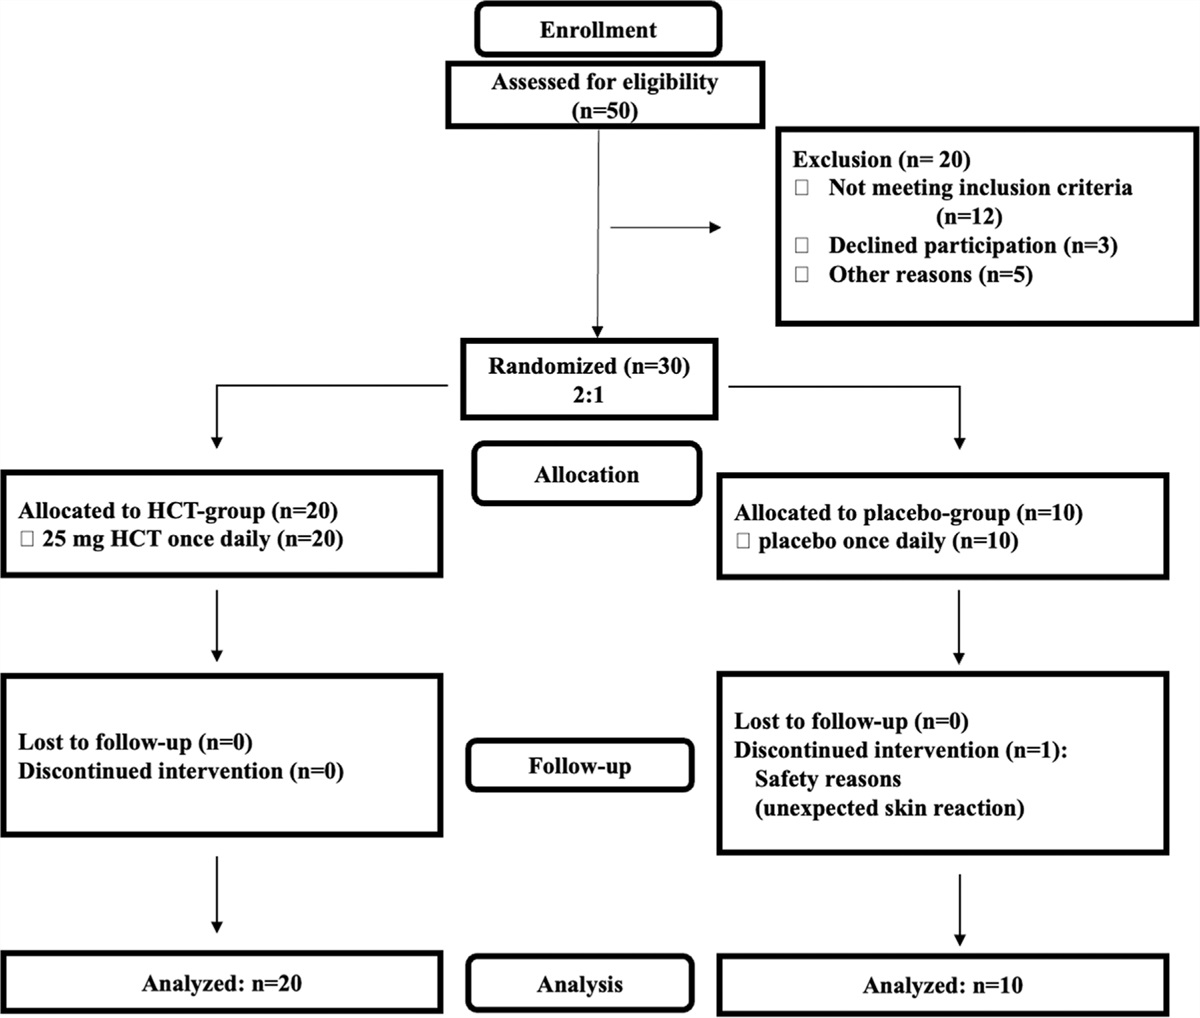 A randomized, placebo-controlled, trial to assess the photosensitizing, phototoxic and carcinogenic potential of hydrochlorothiazide in healthy volunteers